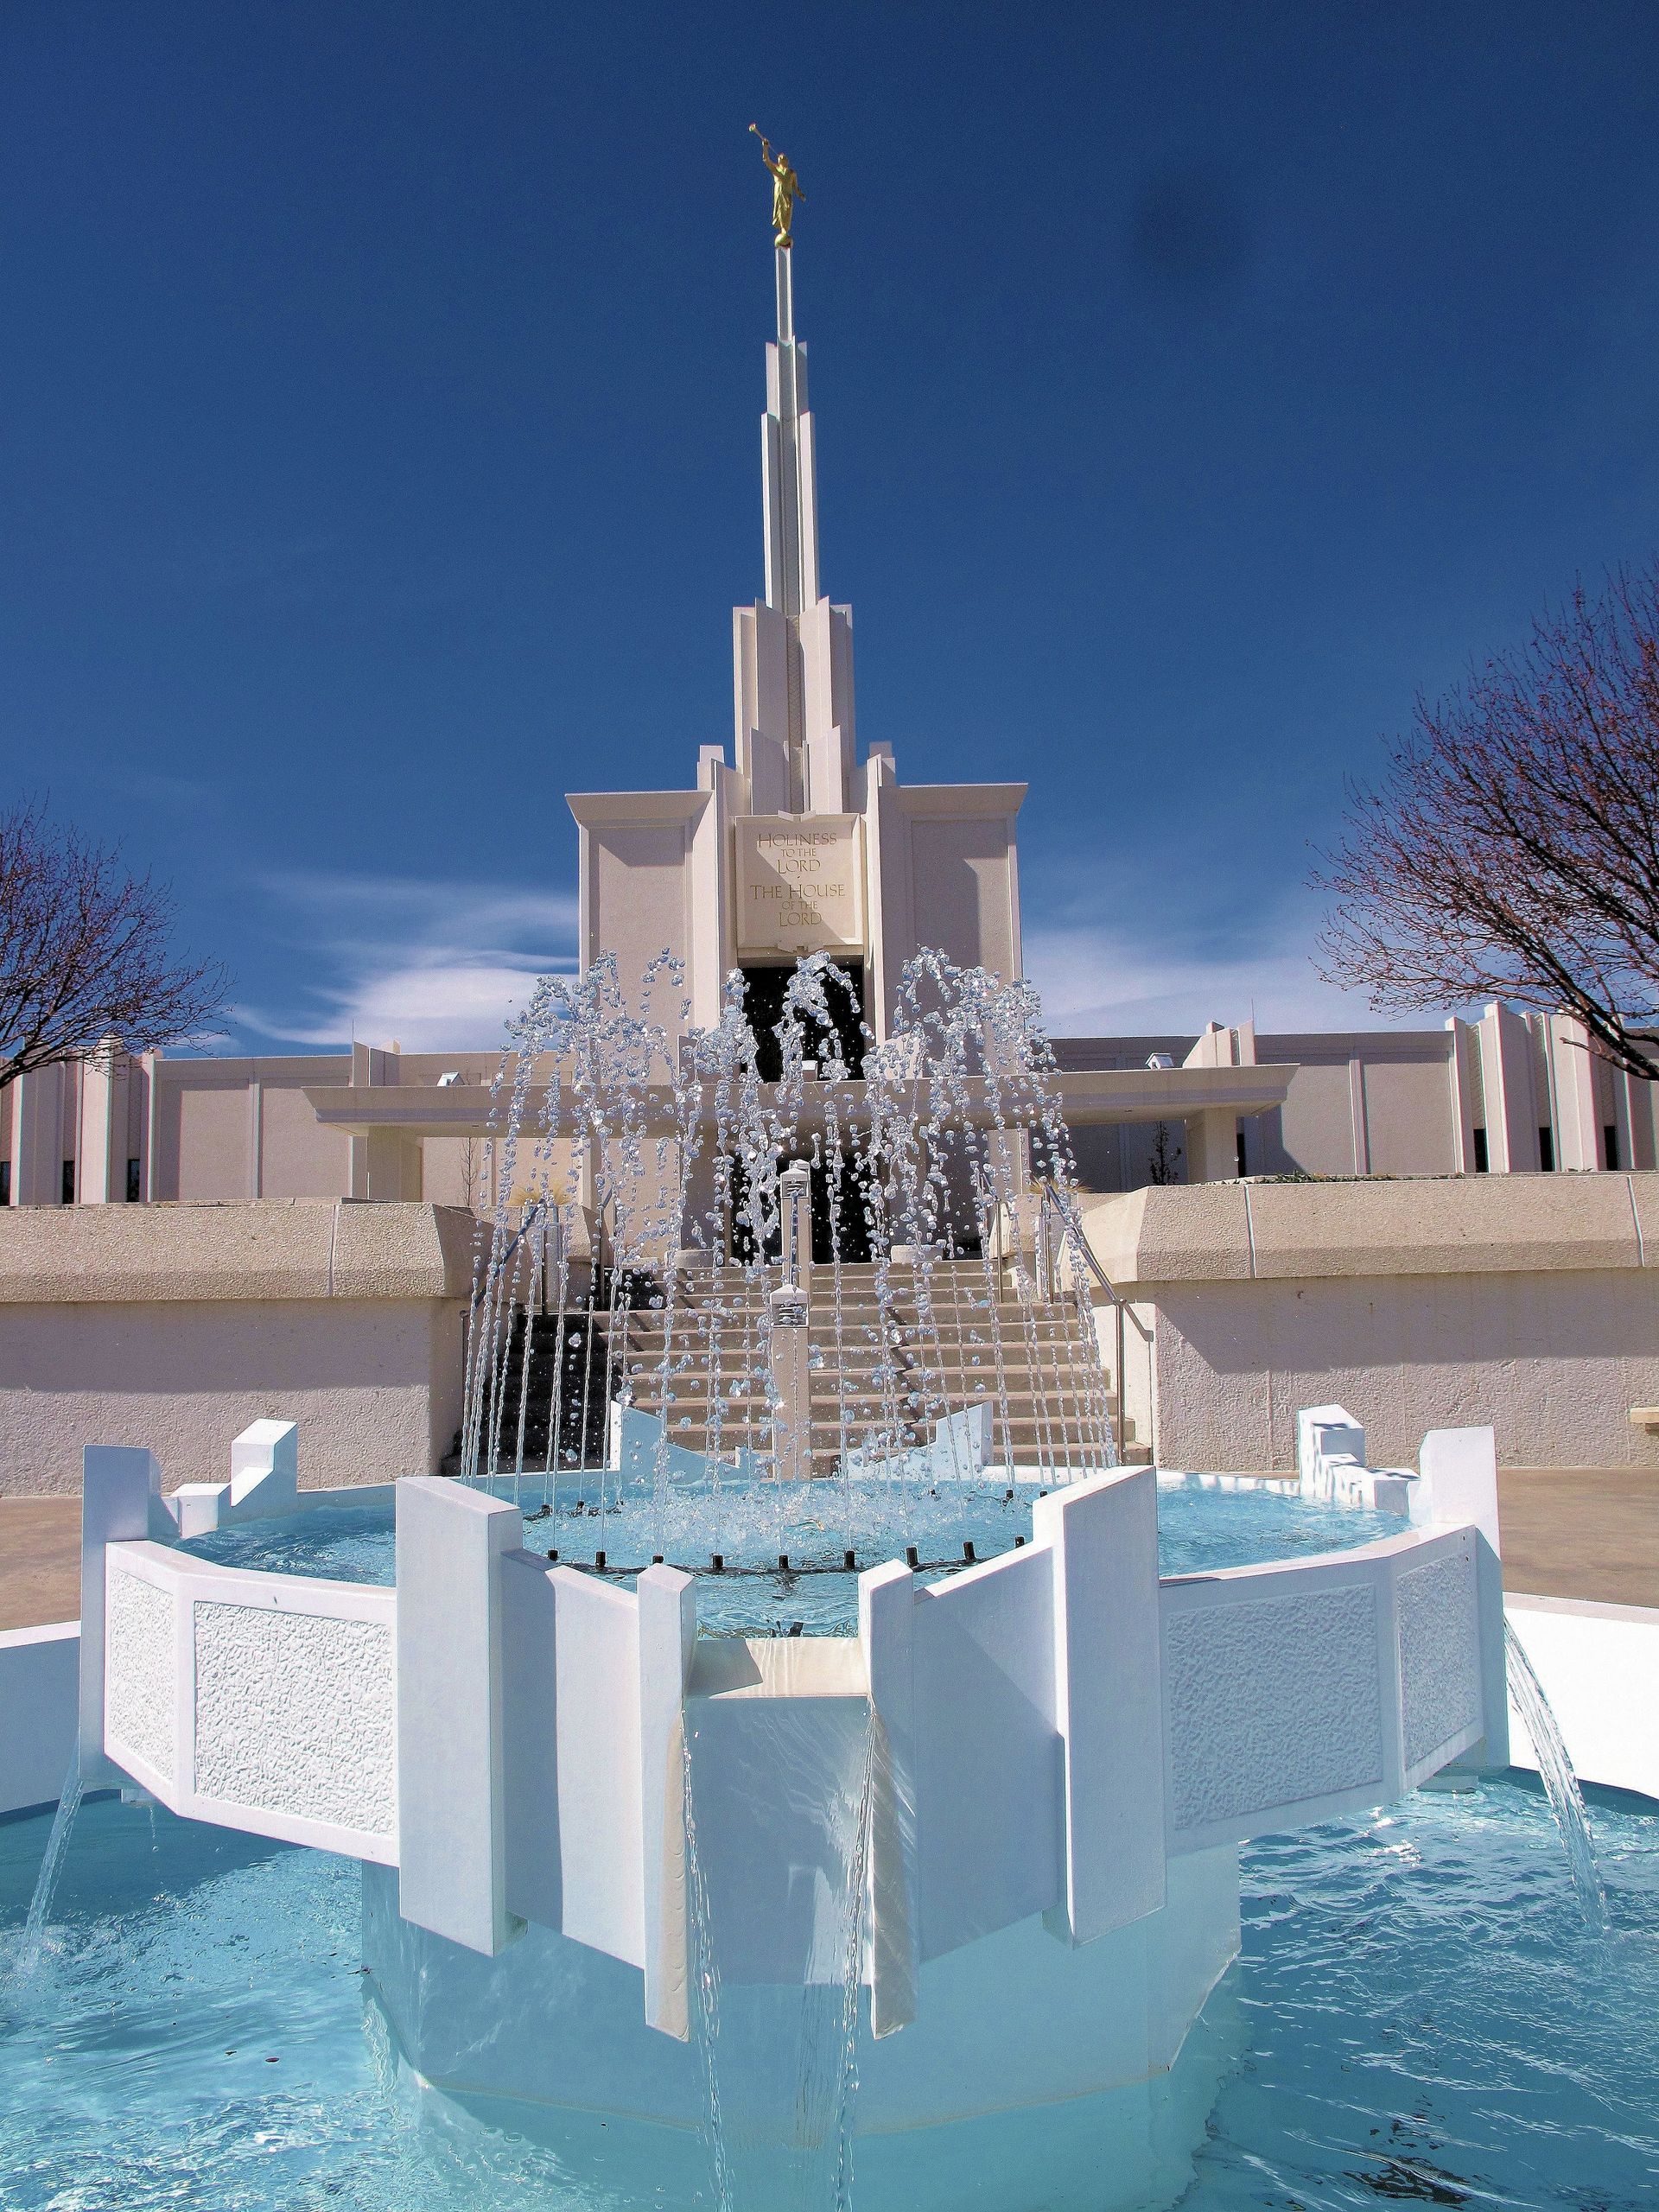 A fountain at the bottom of the stairs that lead up to the entrance of the Denver Colorado Temple.